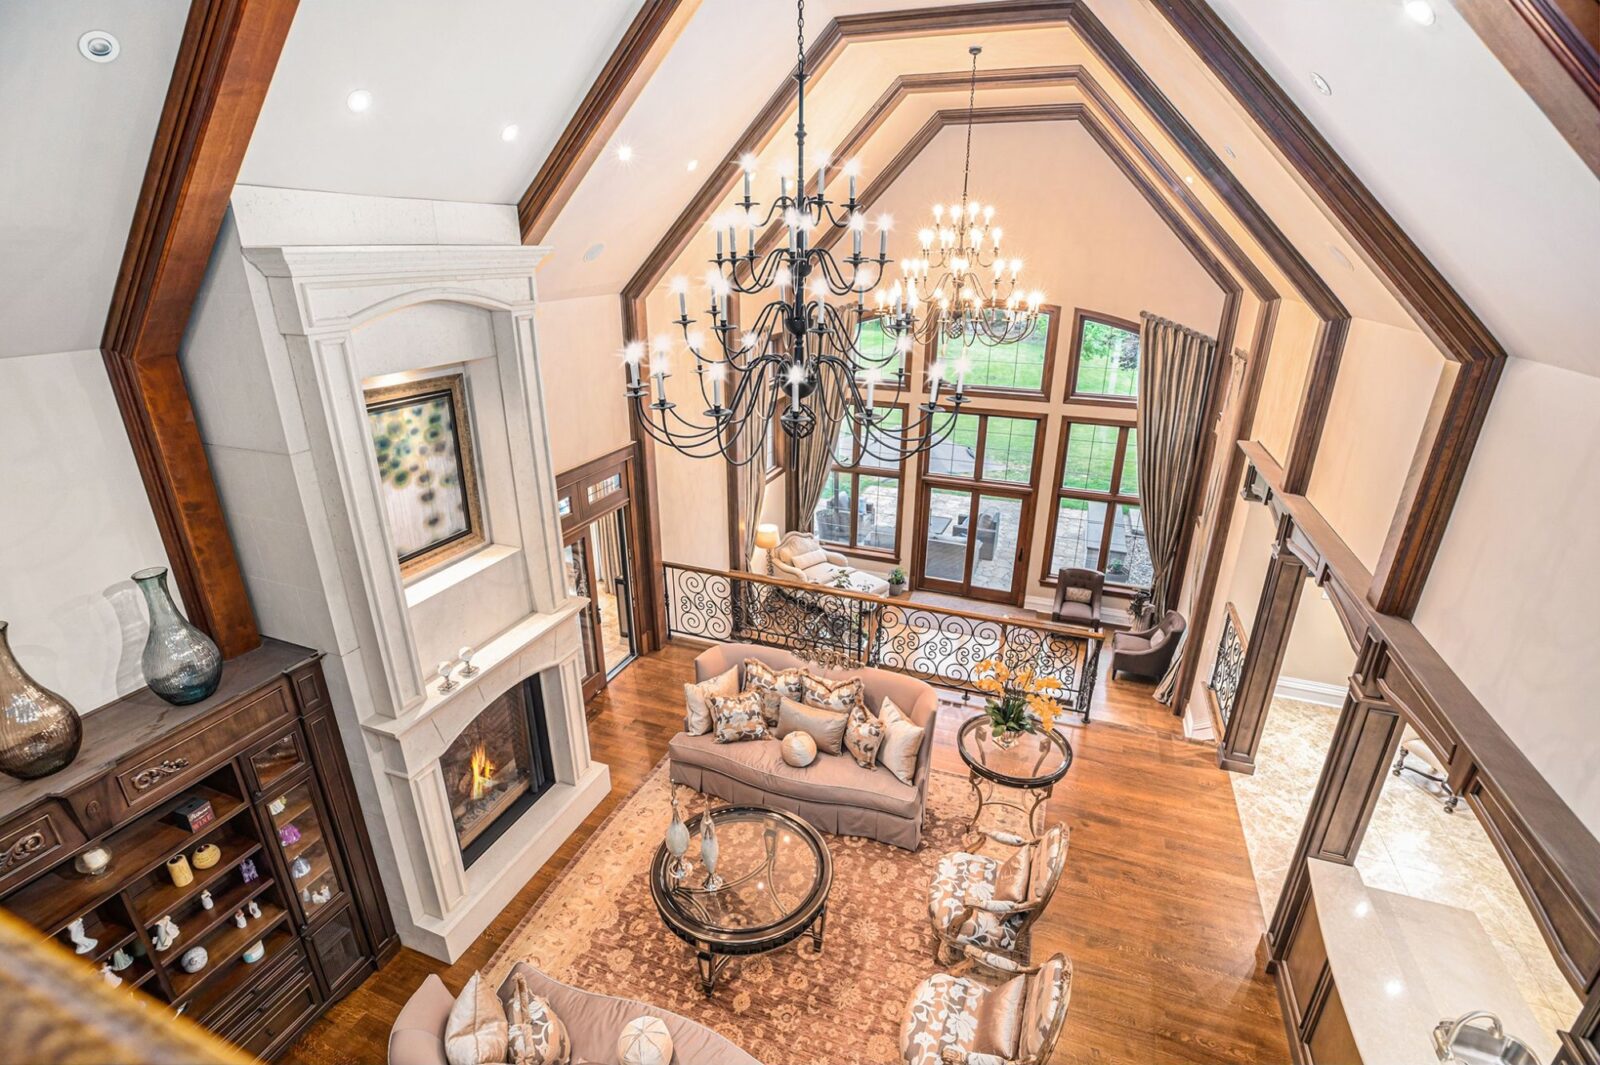 Two Story Living Room With Vaulted Ceiling